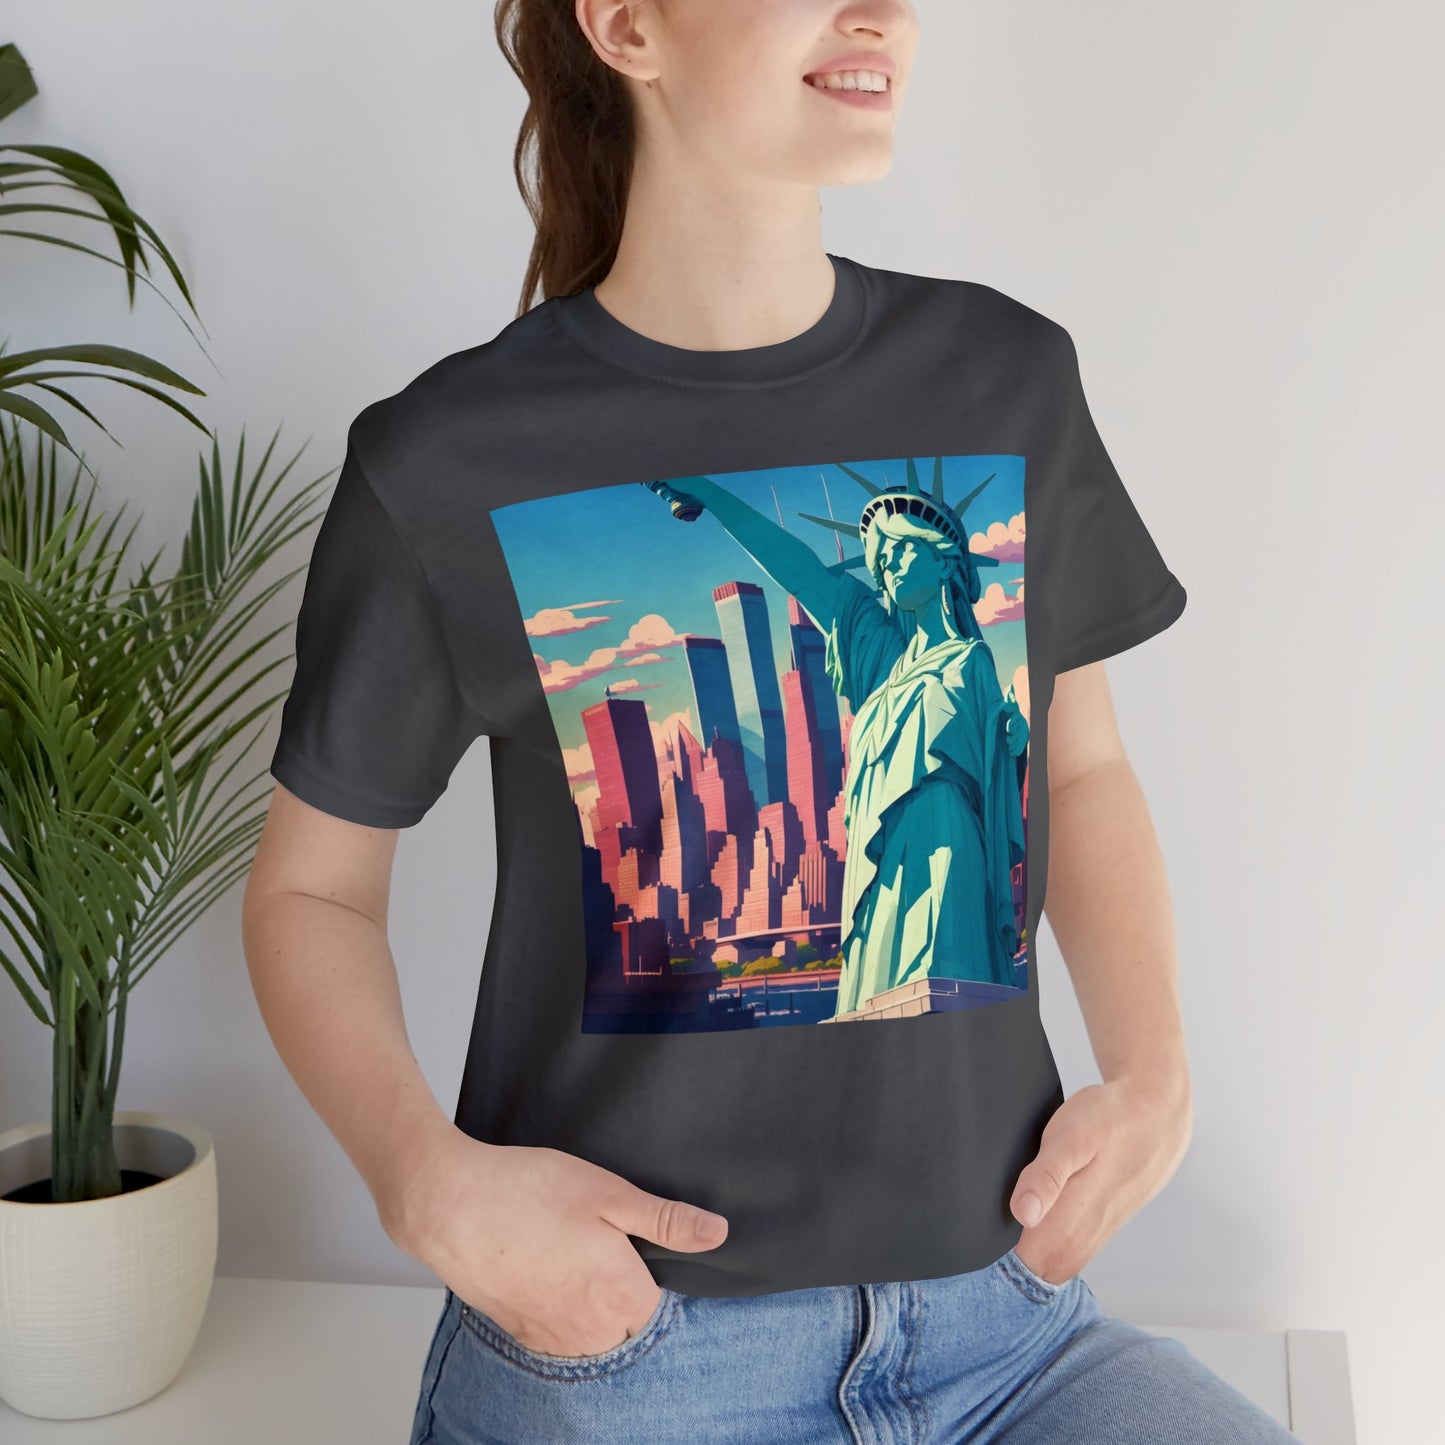 Statue of Liberty | Lady Liberty | Patriotic Gift | New York City | Independence Day | July 4th | USA | Freedom | Unisex | Men's | Women's | Tee | T-Shirt